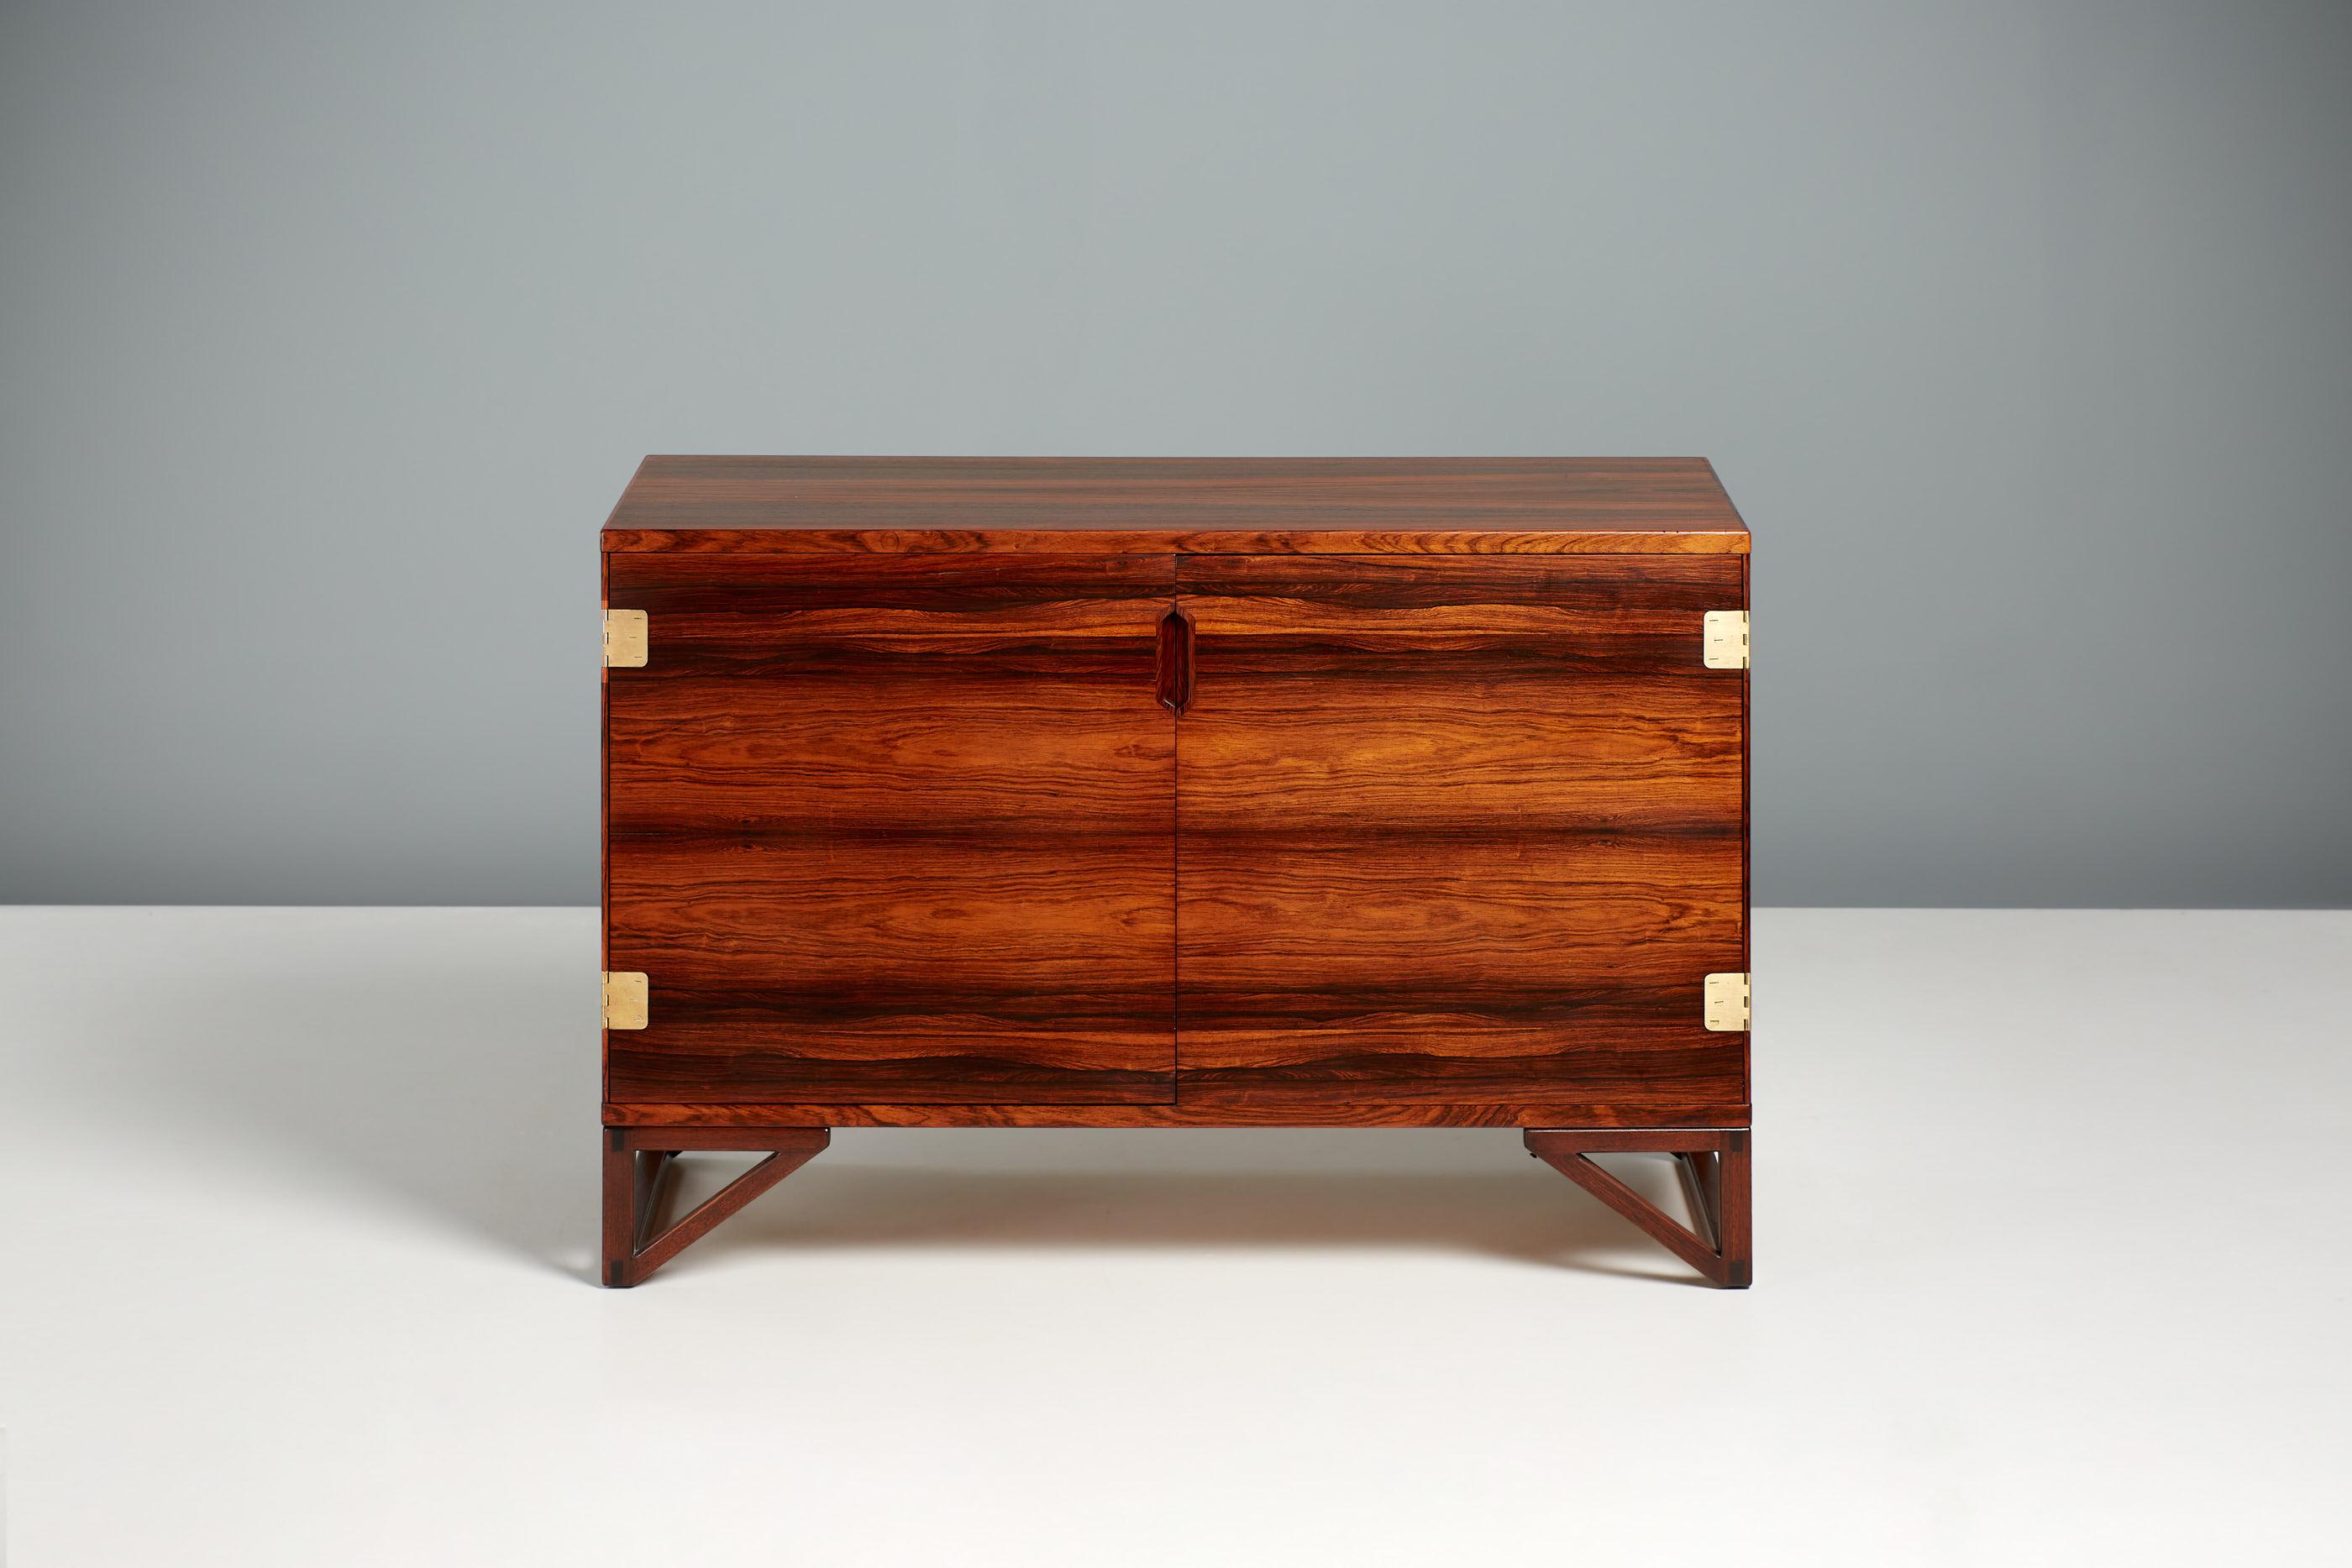 Svend Langkilde - Rosewood cabinet

2-door cabinet made from exquisite rosewood designed by Sven Langkilde and produced by his own company Langkilde Mobler. The internal space is made from solid and veneered African mahogany with a mix of shelves